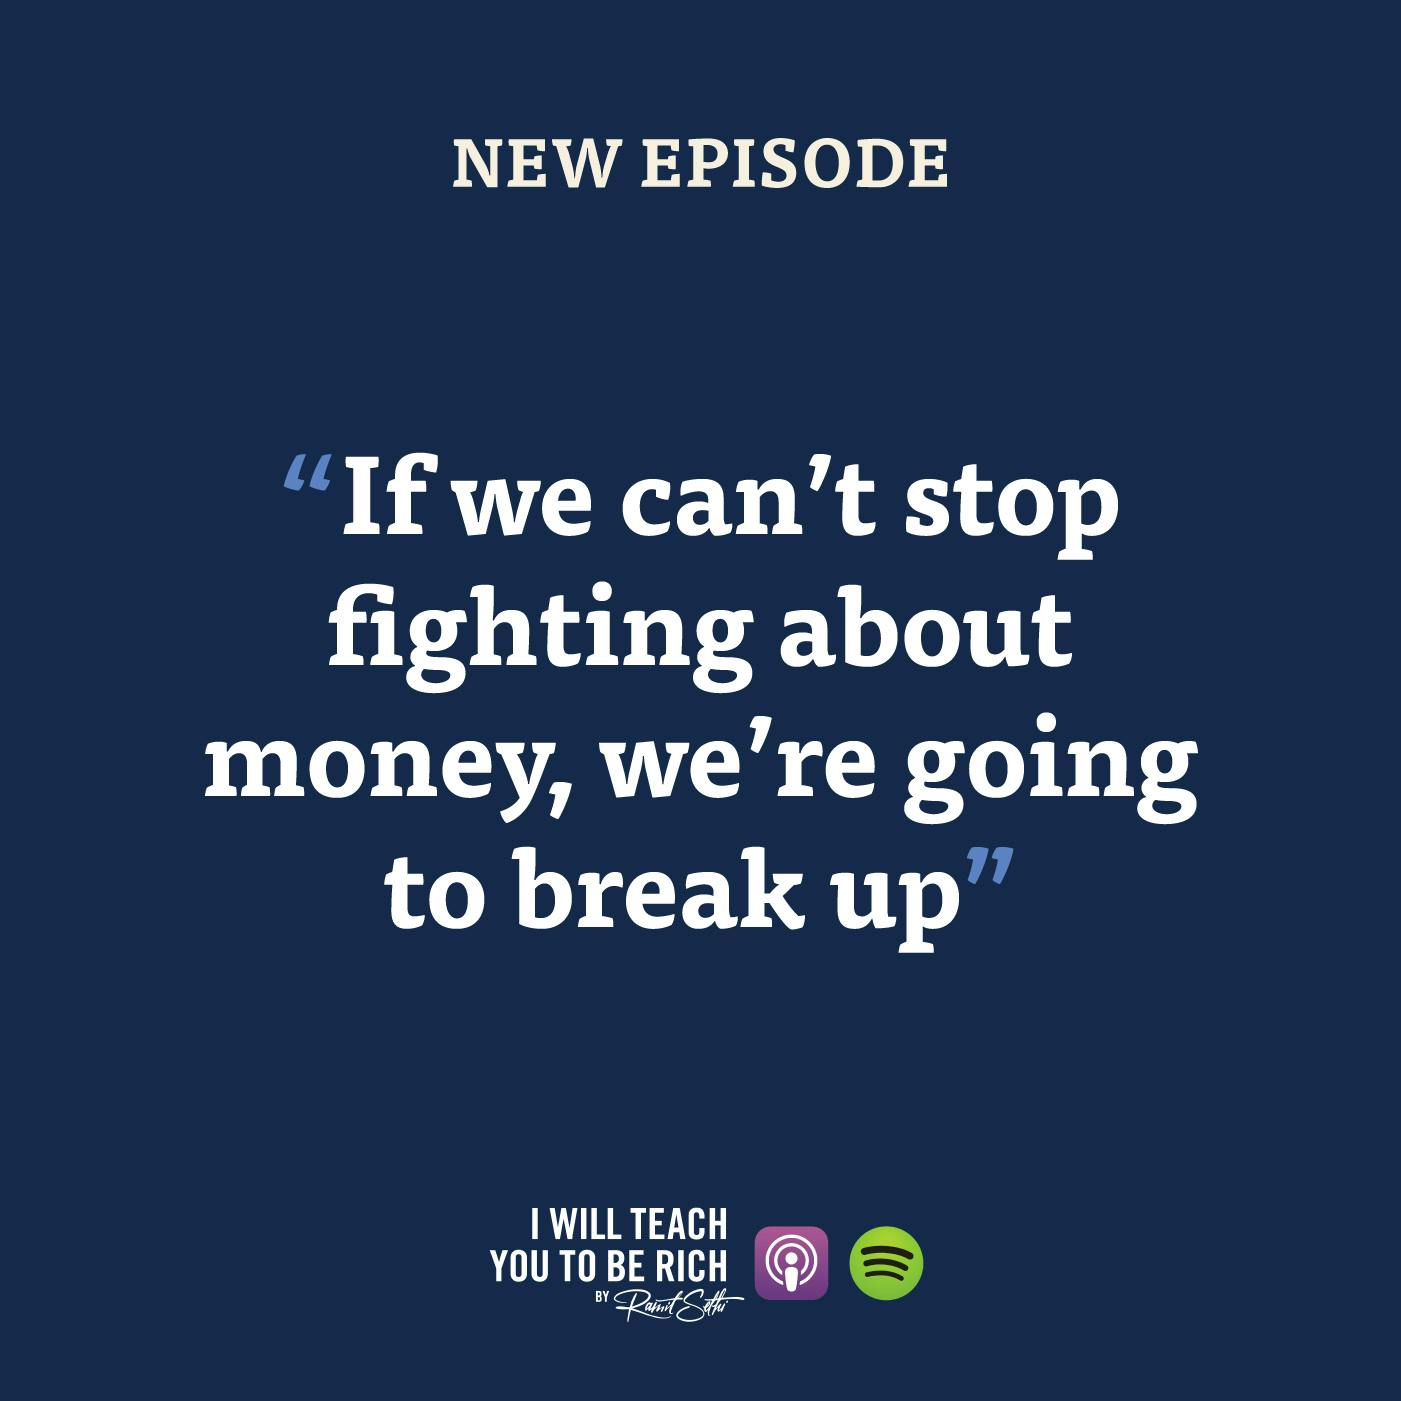 35. “If we can’t stop fighting about money, we’re going to break up”